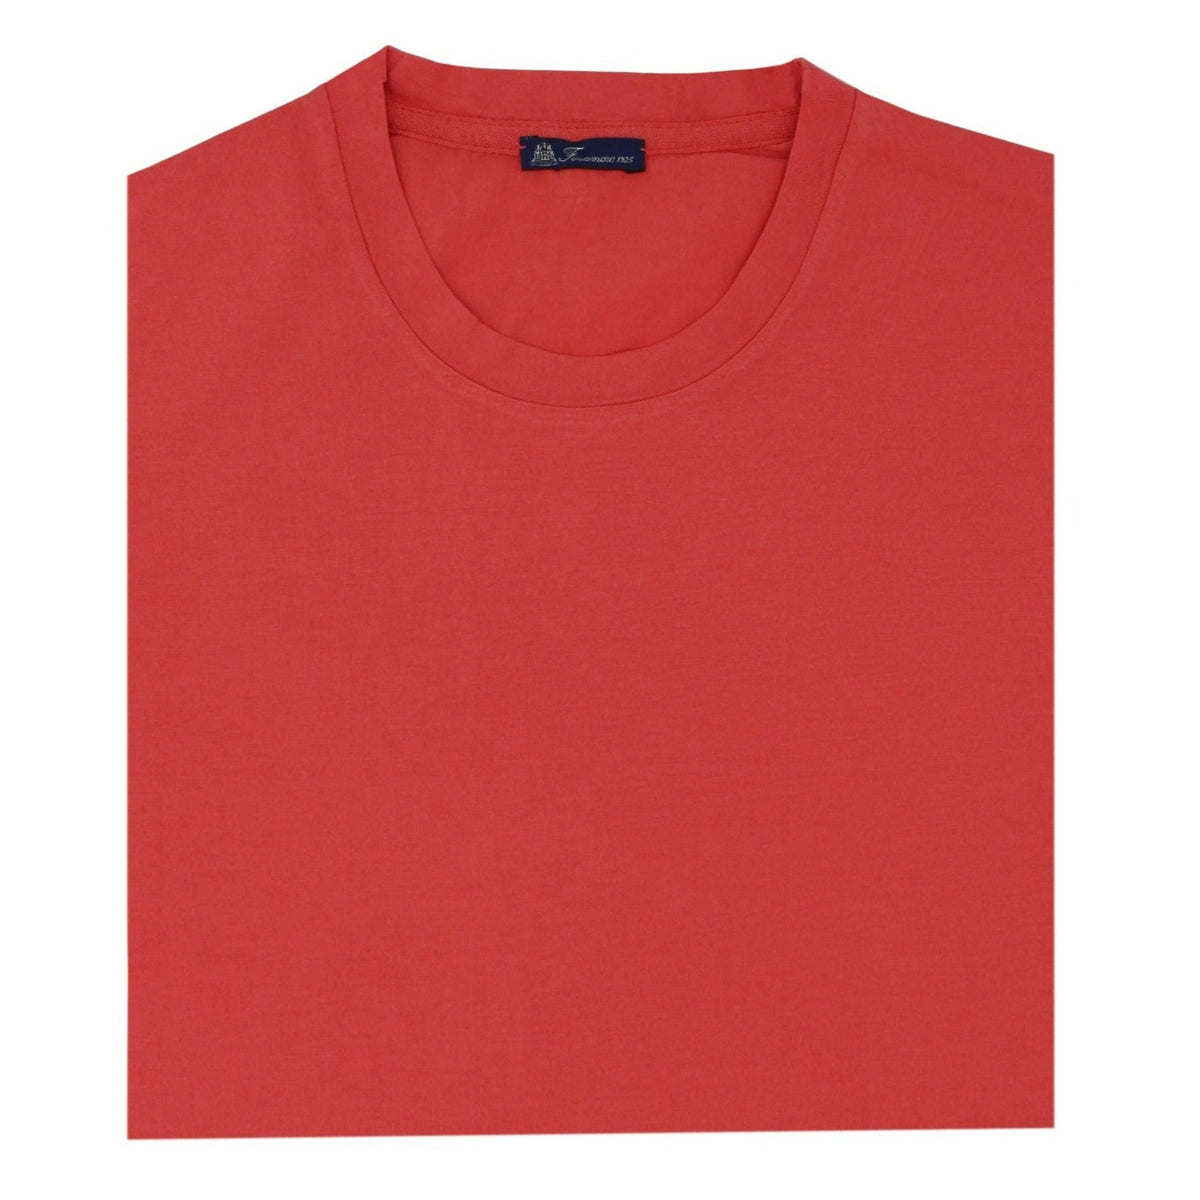 Coral garment dyed Supima cotton t-shirt